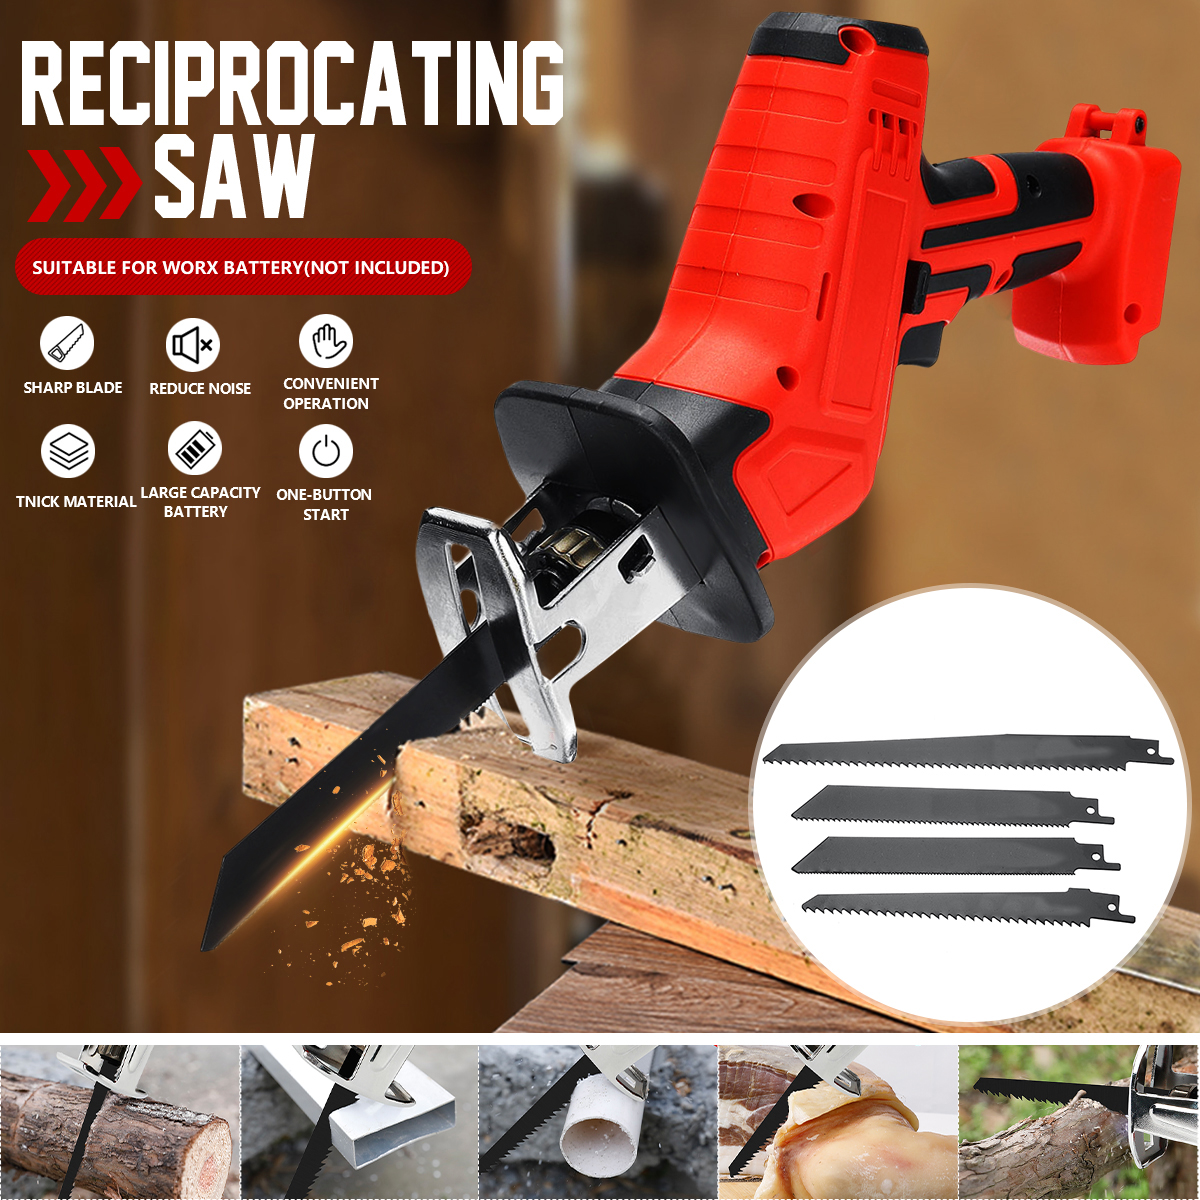 42VF-13000mAh-Cordless-Reciprocating-Saw-Electric-Saws-Portable-Woodworking-Power-Tools-1640981-2